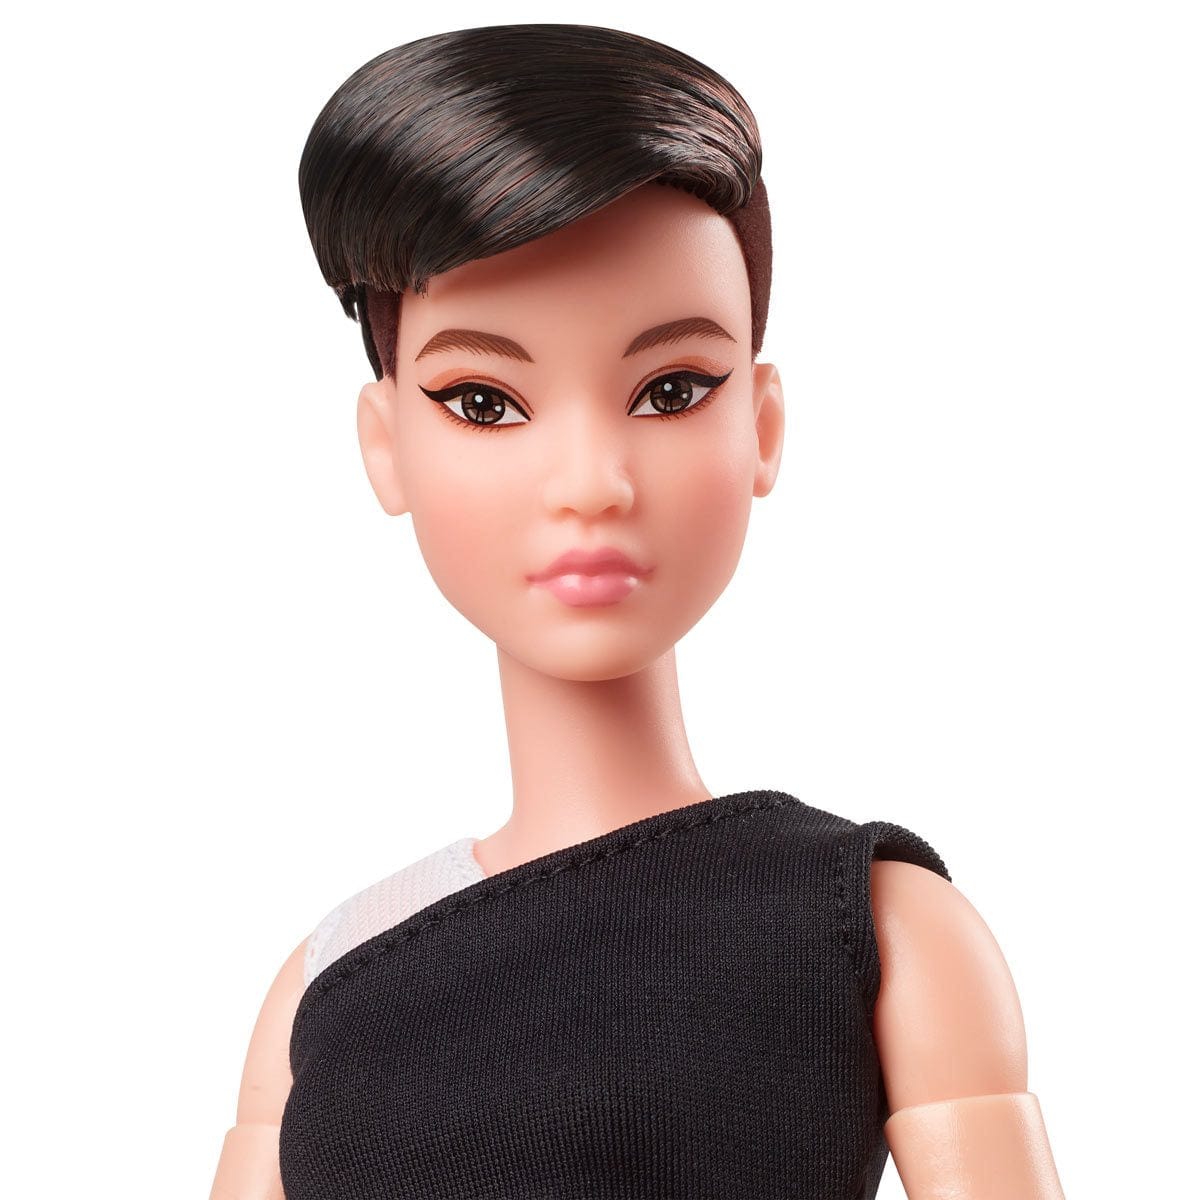 Barbie Looks Doll With Pixie Brunette Hair